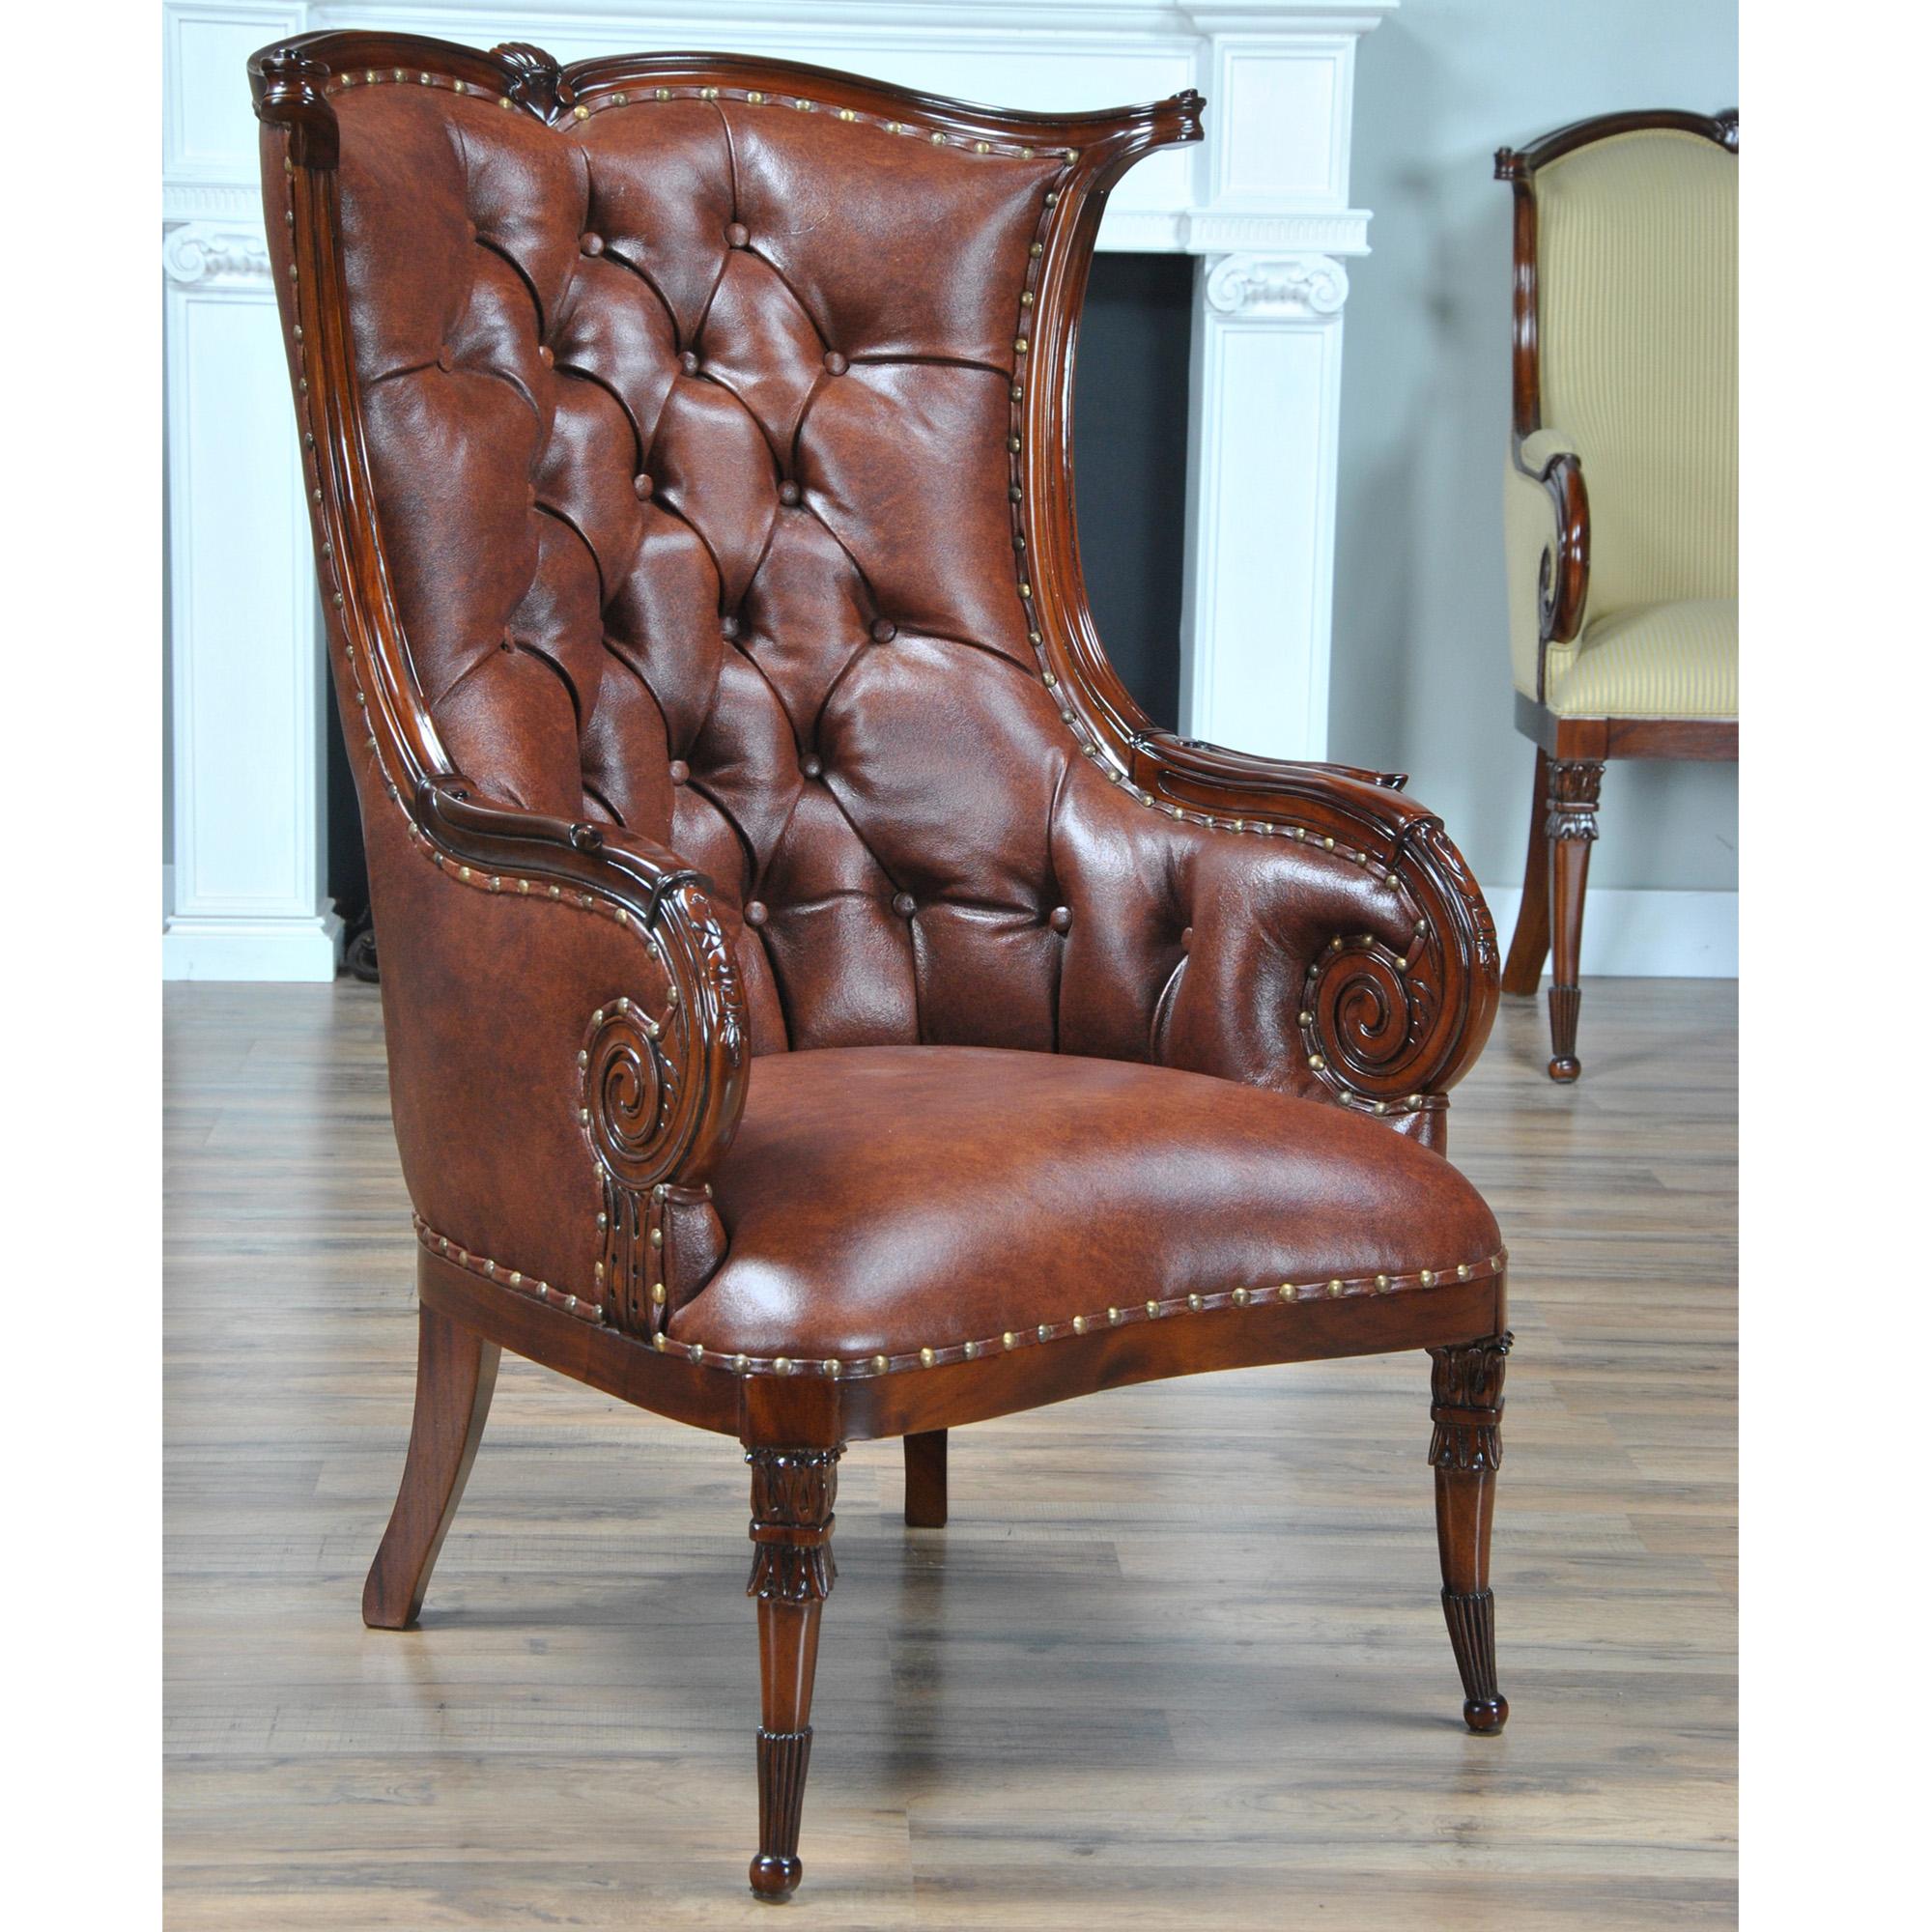 The Niagara Furniture Leather Fireside Chair is designed after an American original antique chair and ships out covered in full grained tufted genuine leather with brass nail trim. This reproduction antique has all of the features of it’s ancestral